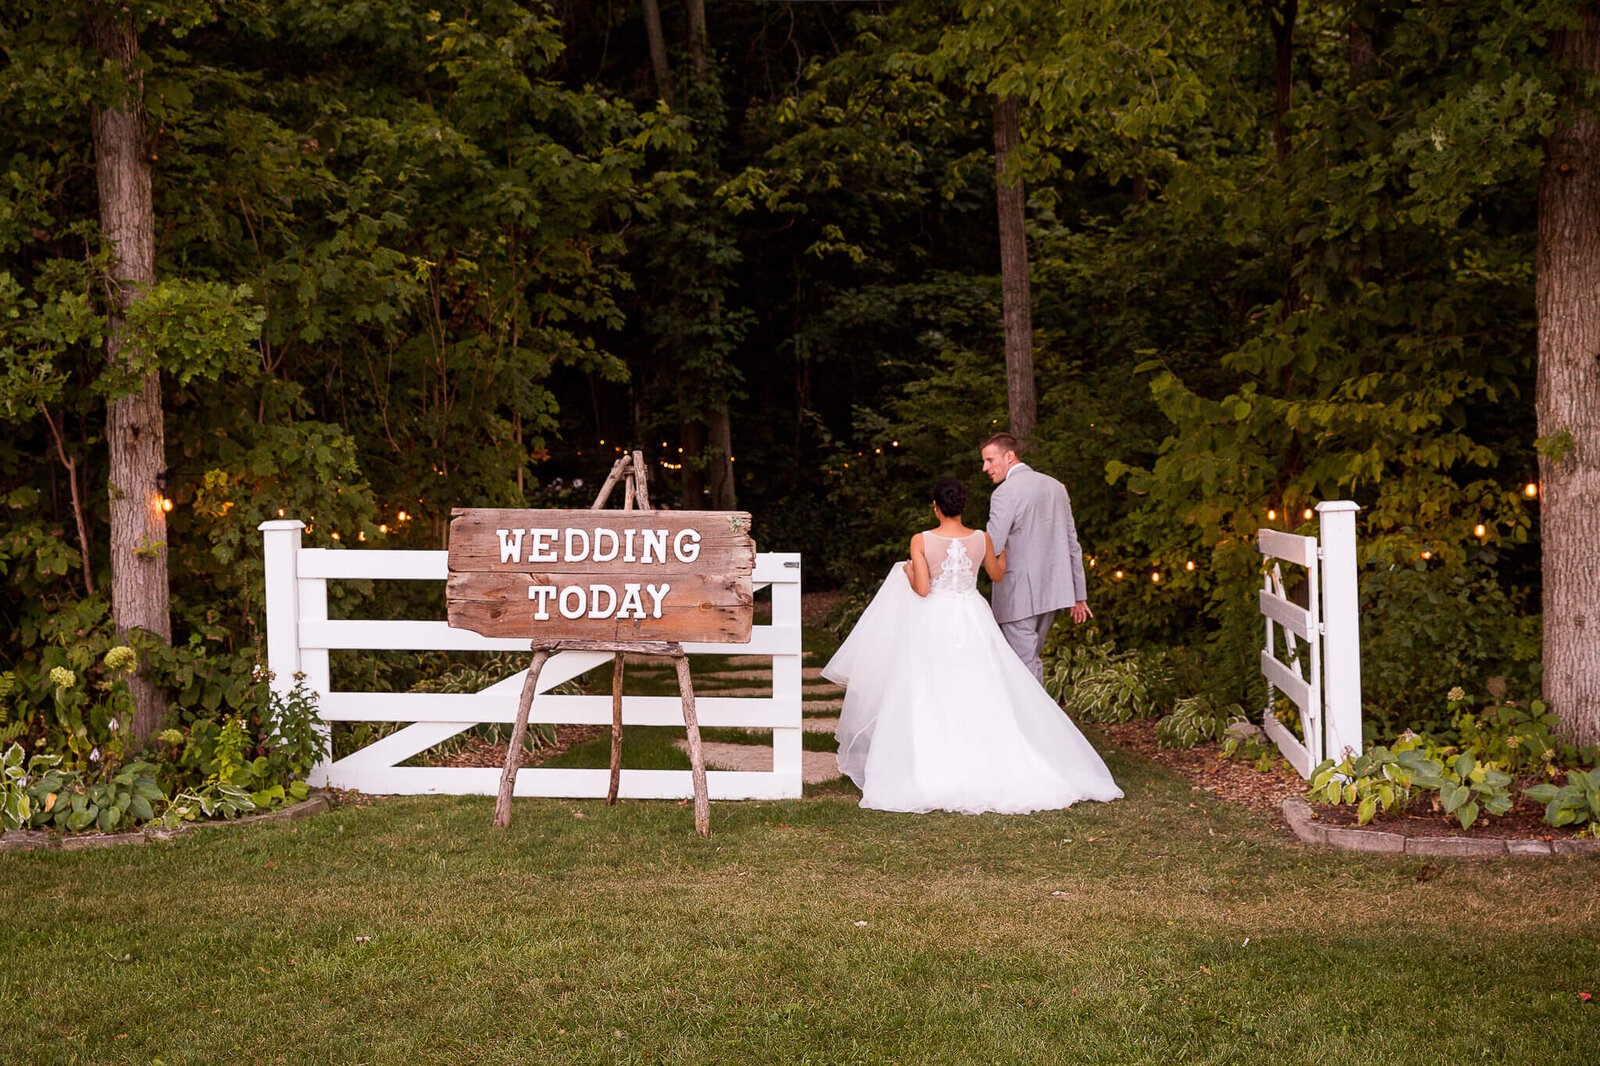 Bride and groom walking together with wedding today sign.